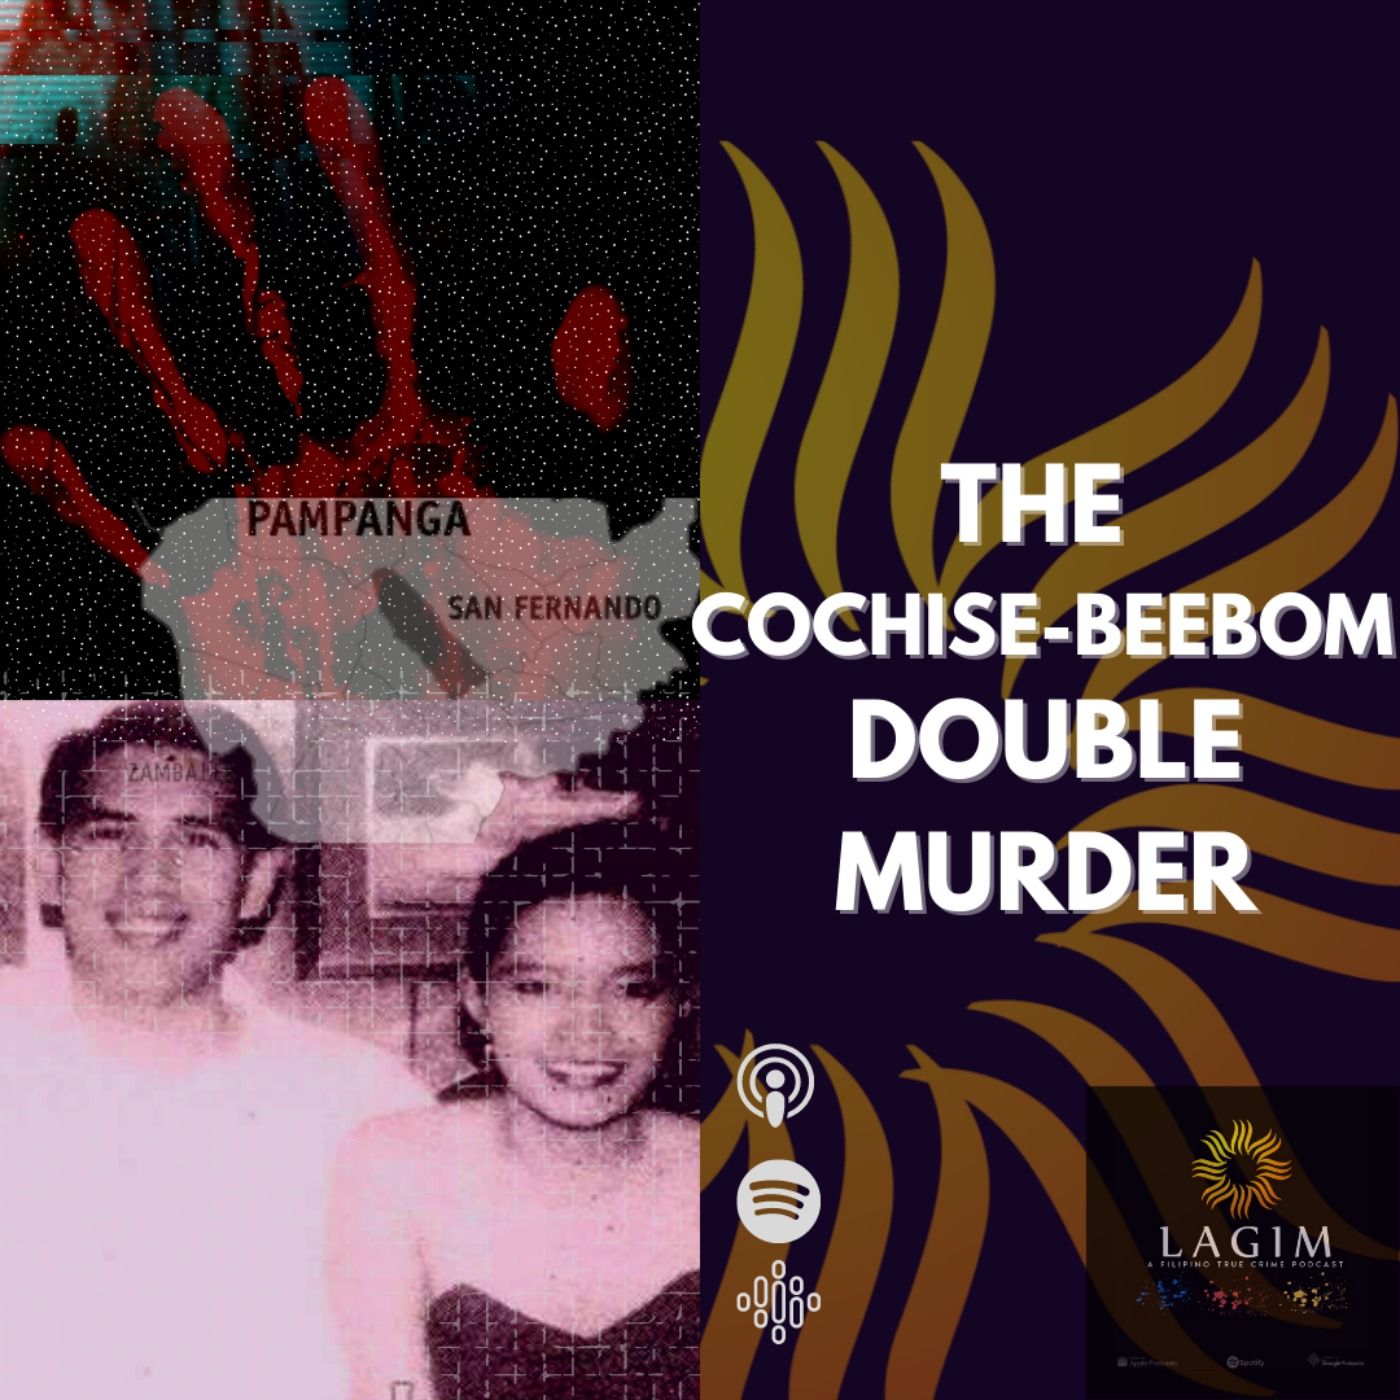 The Cochise-Beebom Double Murder